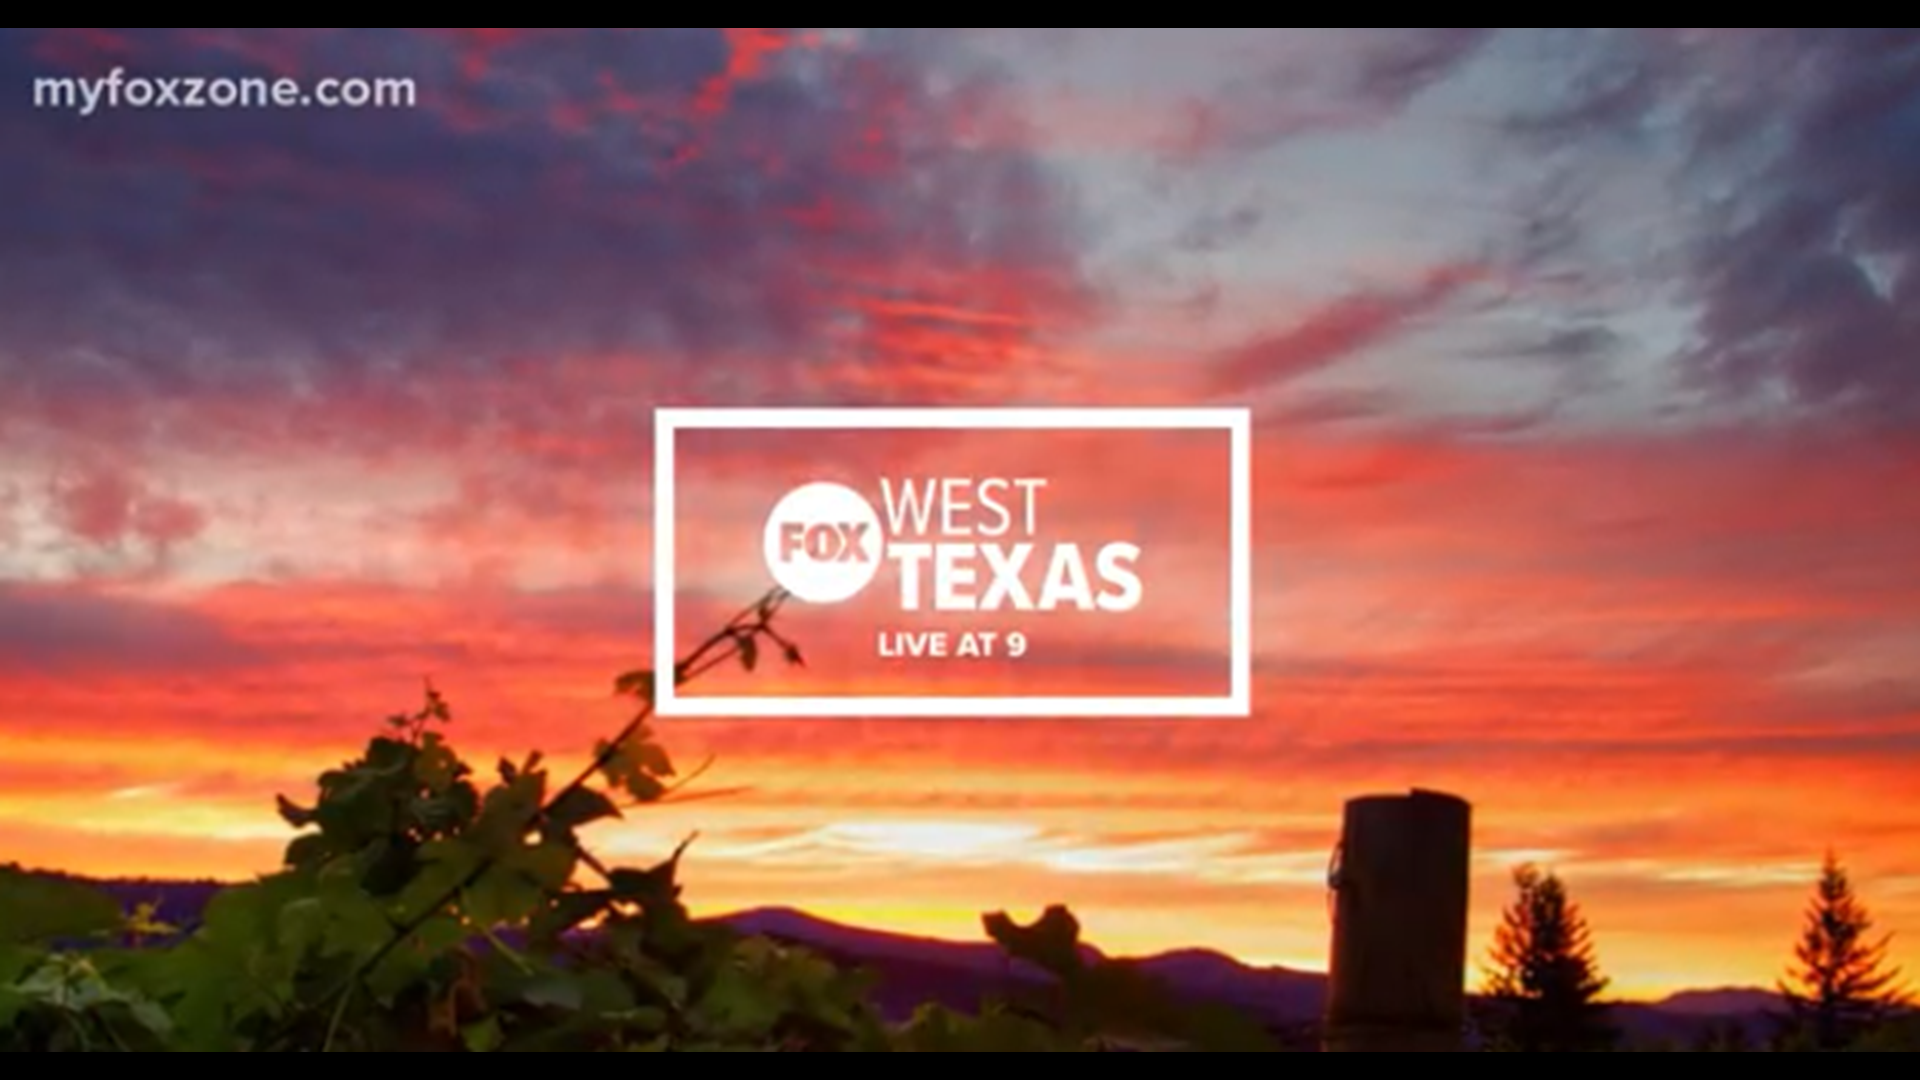 Playoff season is finally here, FOX West Texas has you covered.